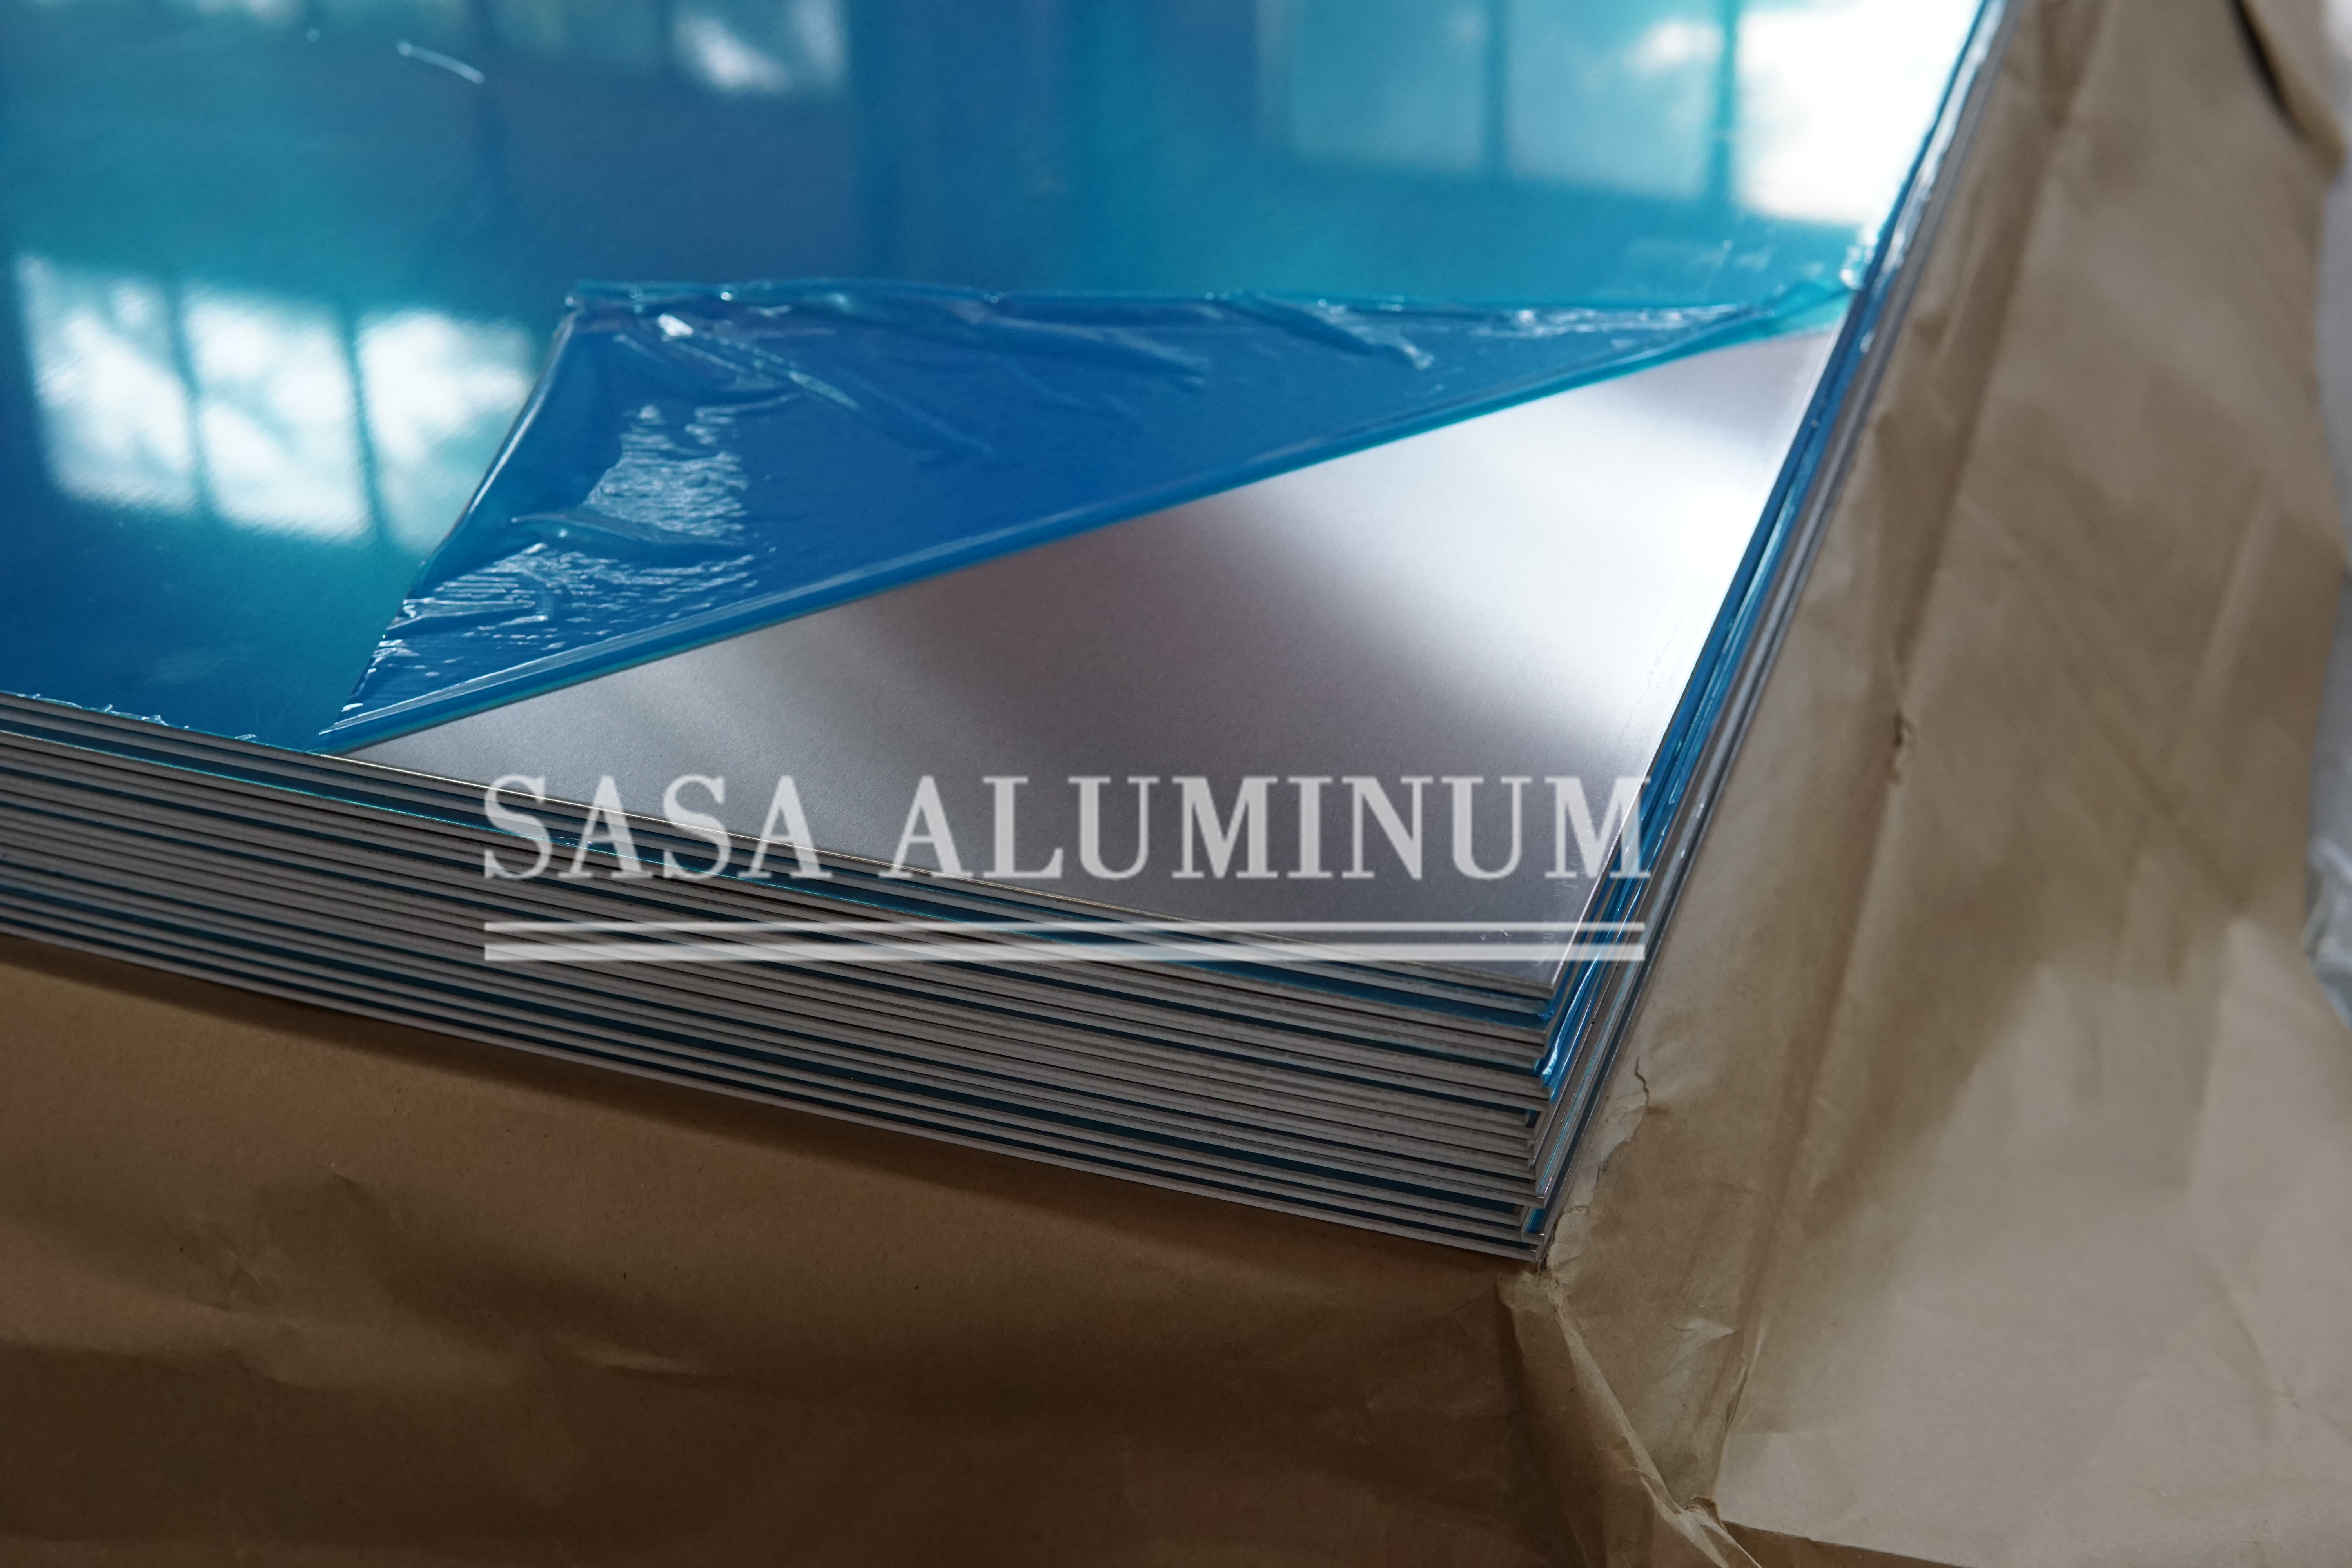 What are the mechanical properties of 19000 aluminum sheet? What are its properties such as strength and hardness?